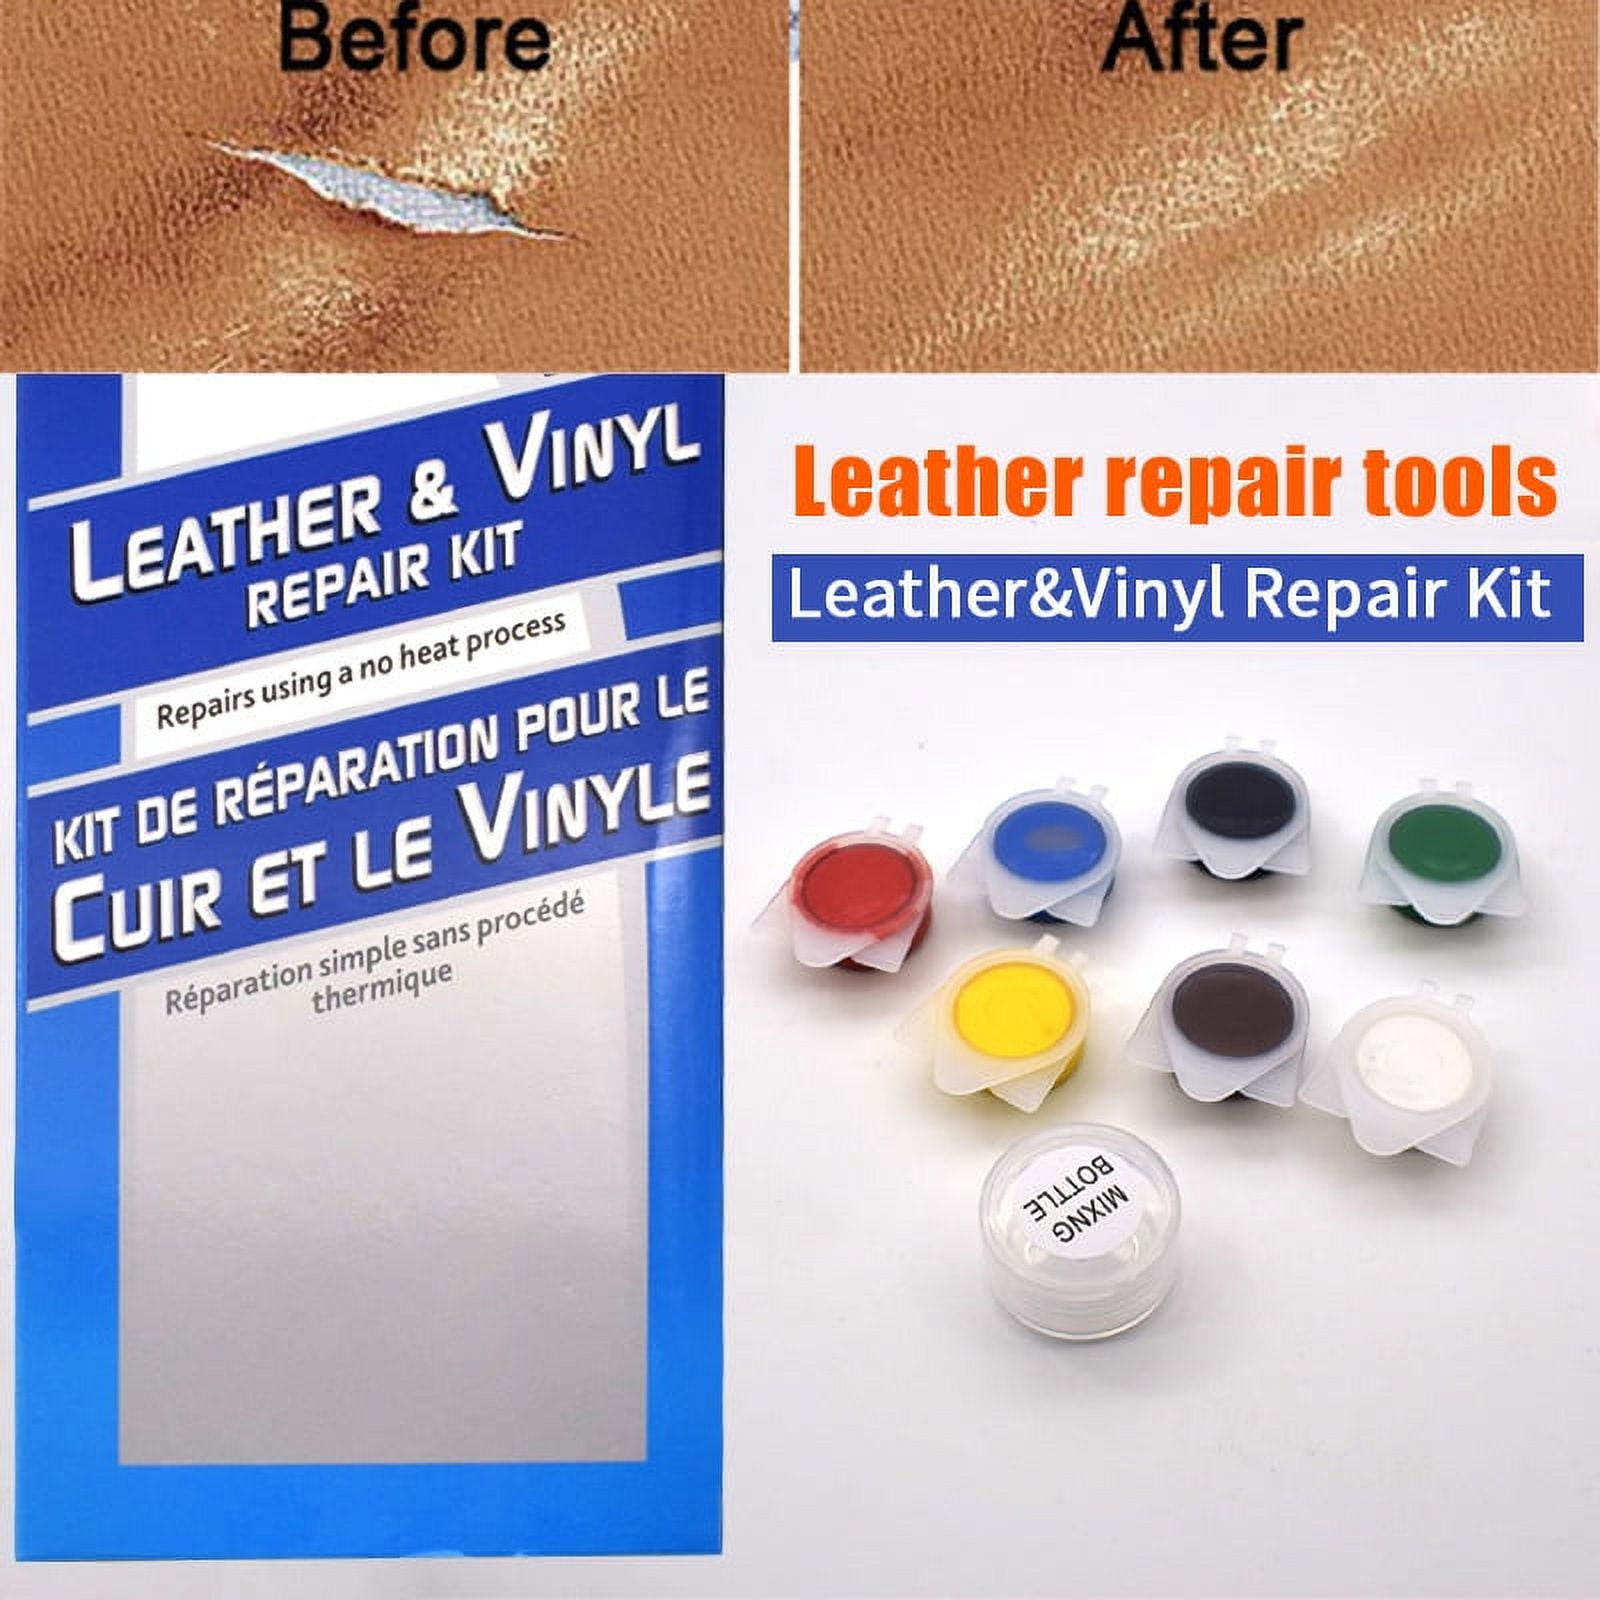 Type B Vinyl Seat Repair Kit Clear Patching Holes Tears Car Motorcycle Boat  1pc for sale online